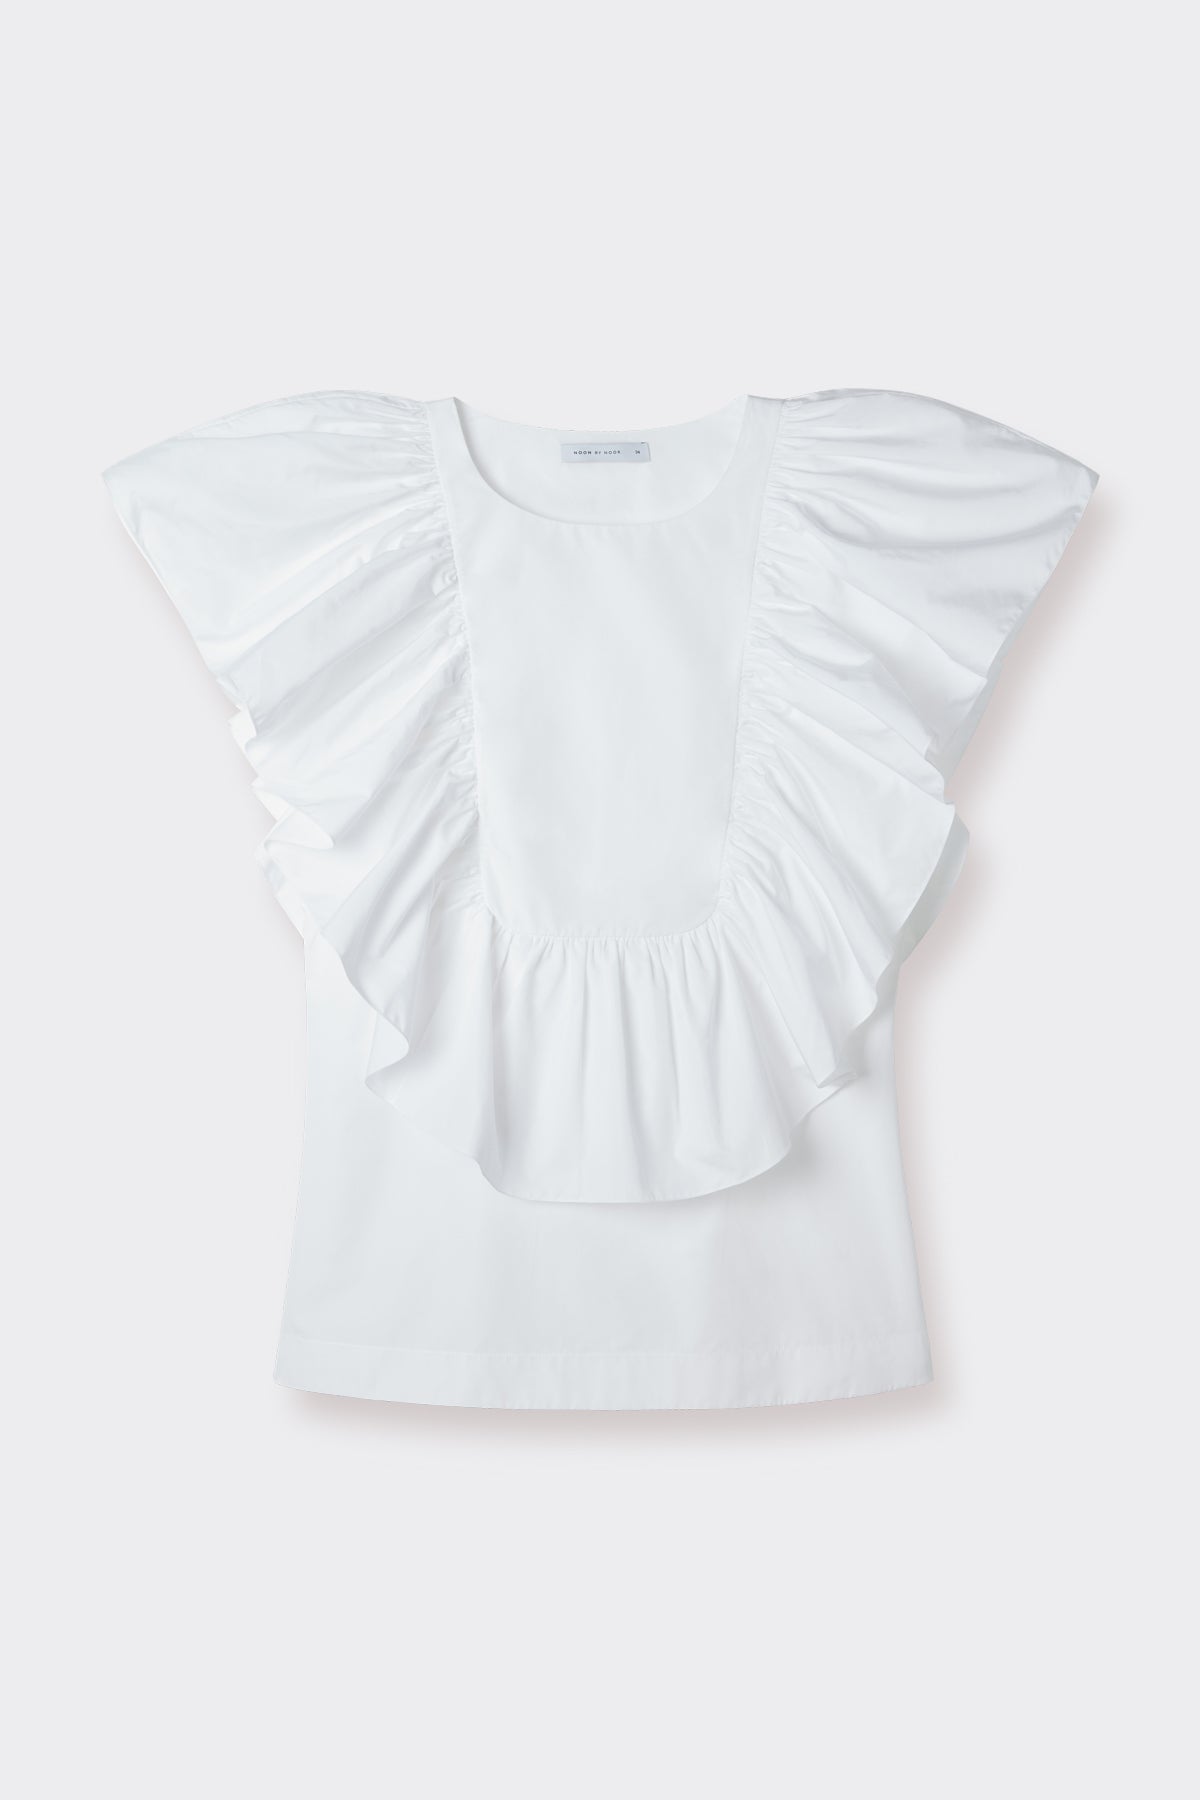 Charlize Dress in White| Noon by Noor